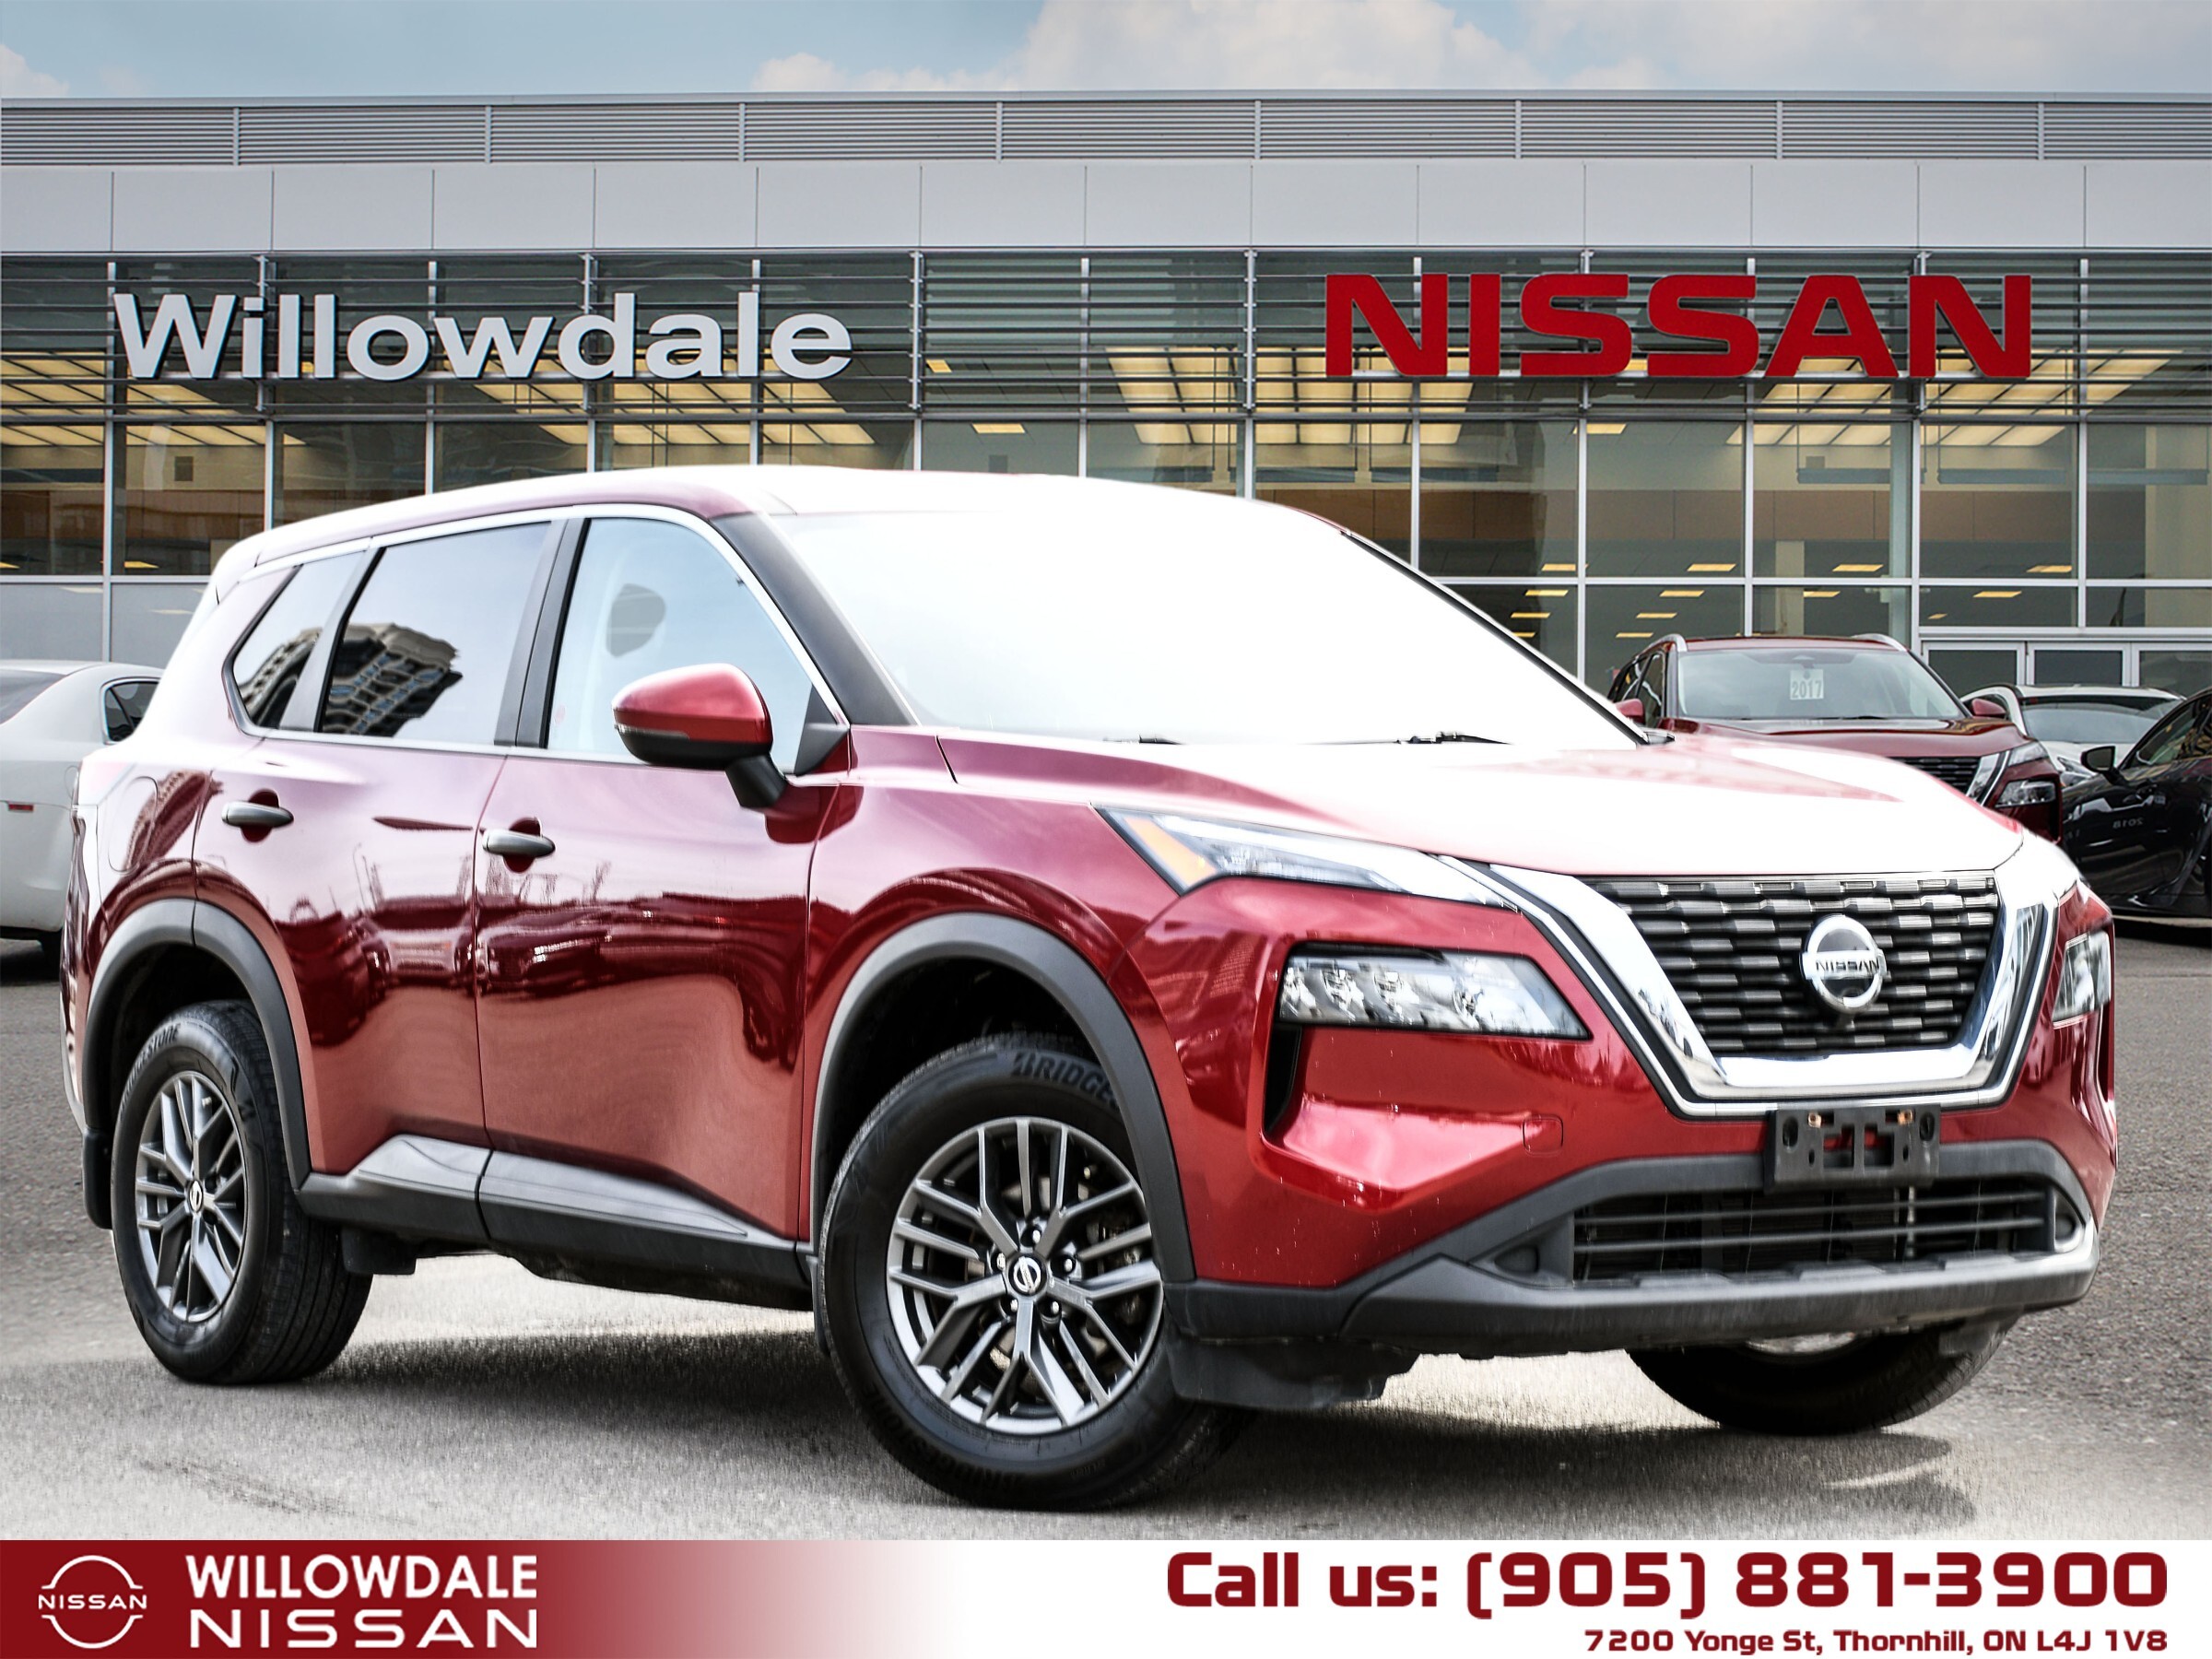 2021 Nissan Rogue S - SALE EVENT MAY 24- MAY 25